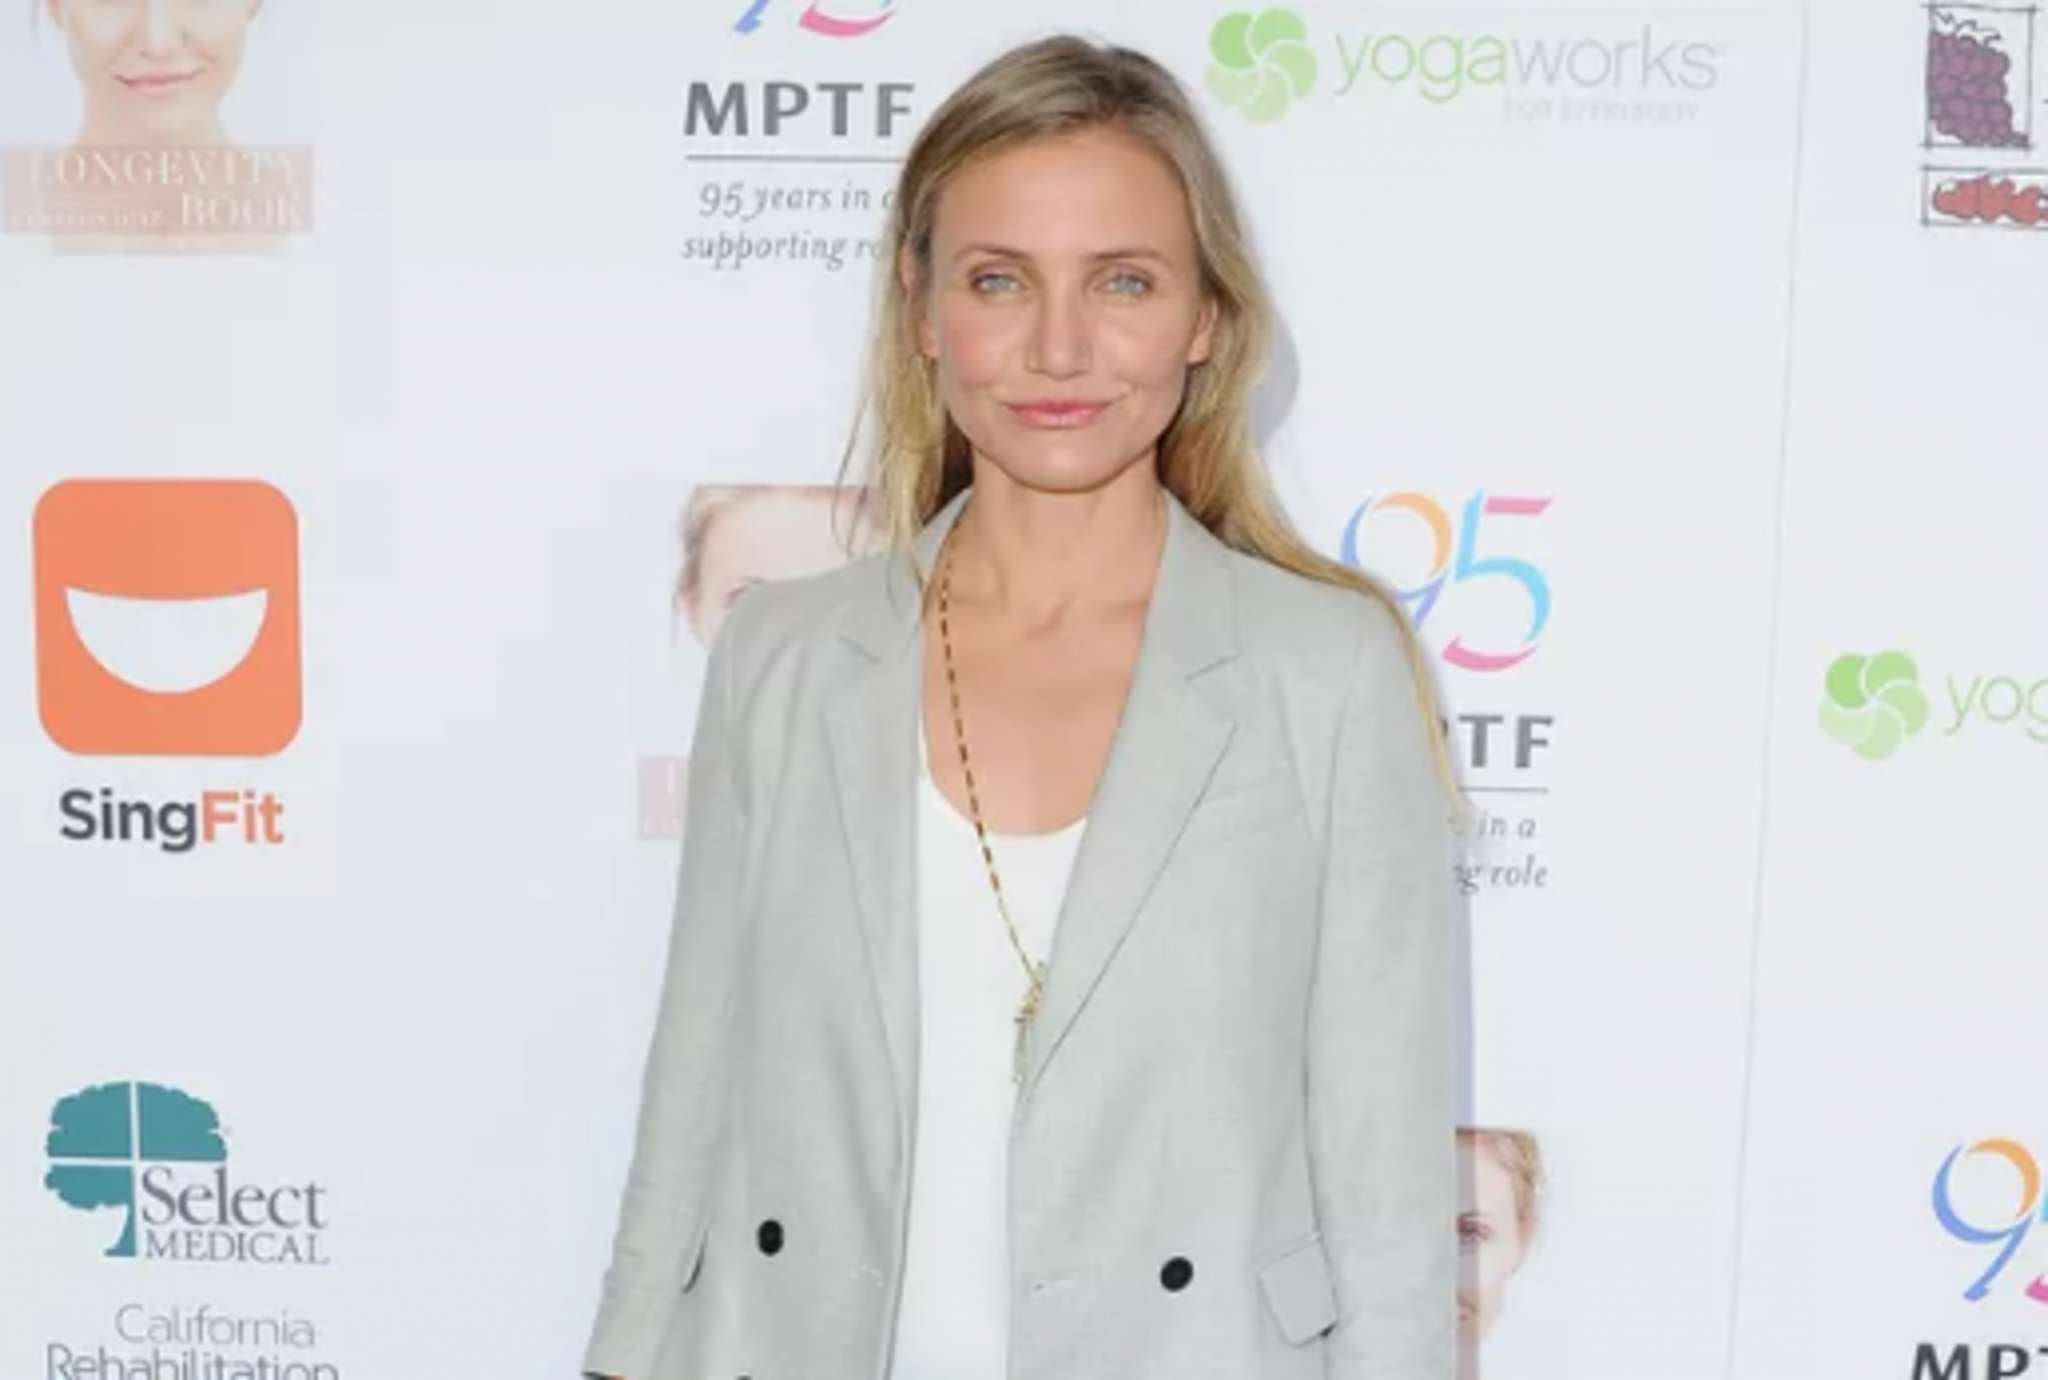 Cameron Diaz's 50th birthday celebration included her husband Benji Madden, Adele, and other celebrities.